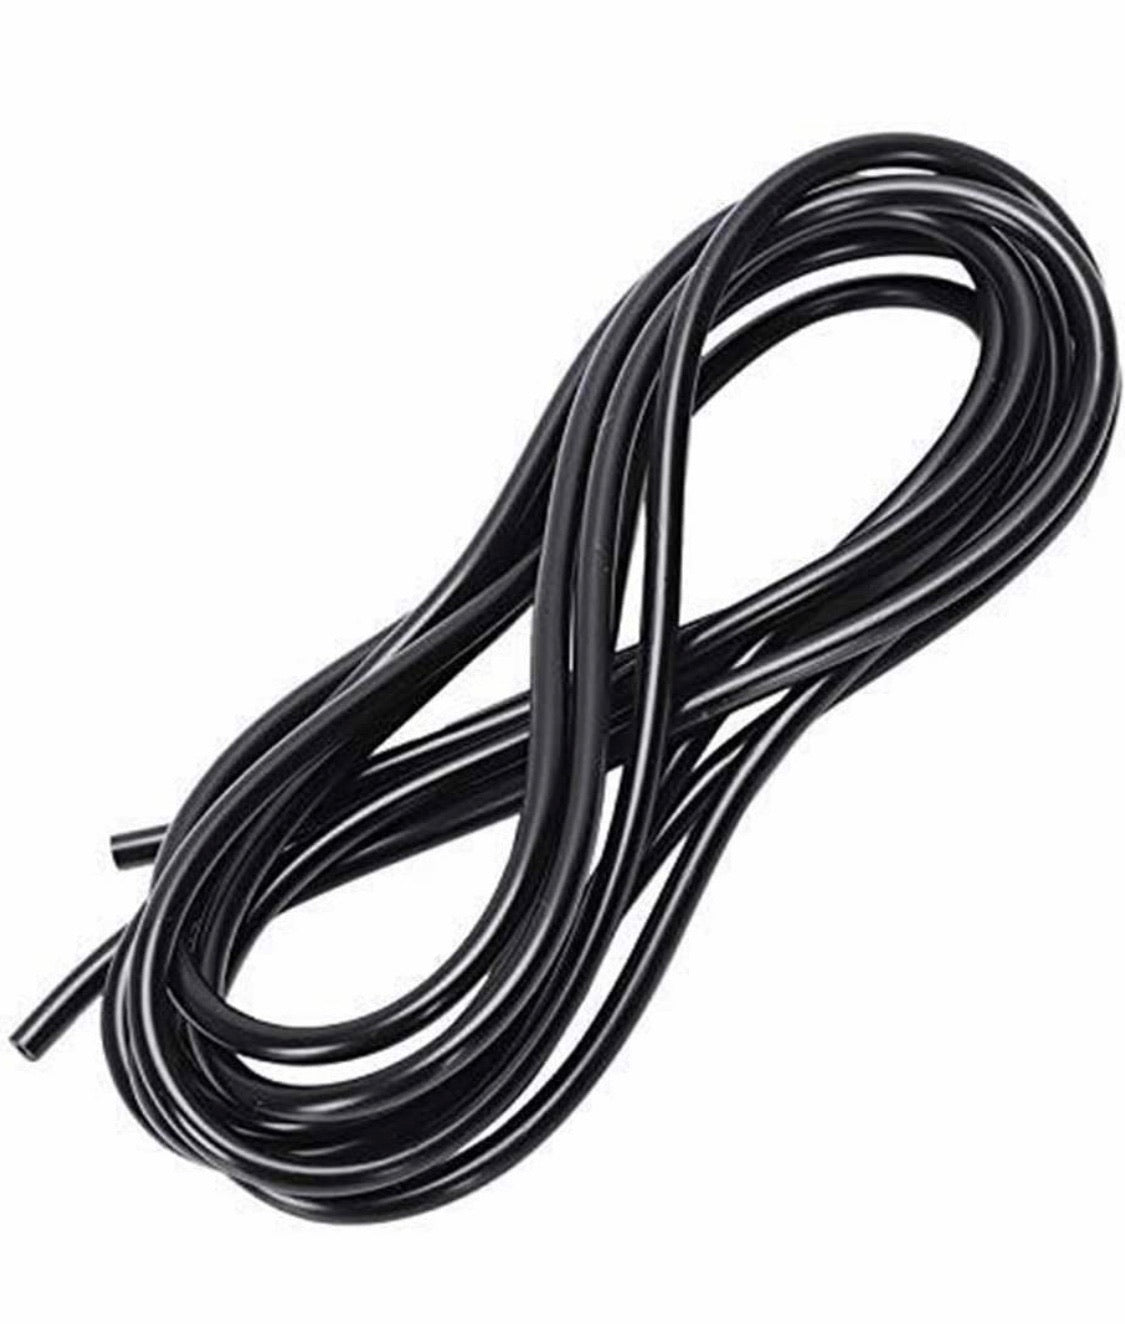 York fitness speed rope with counter